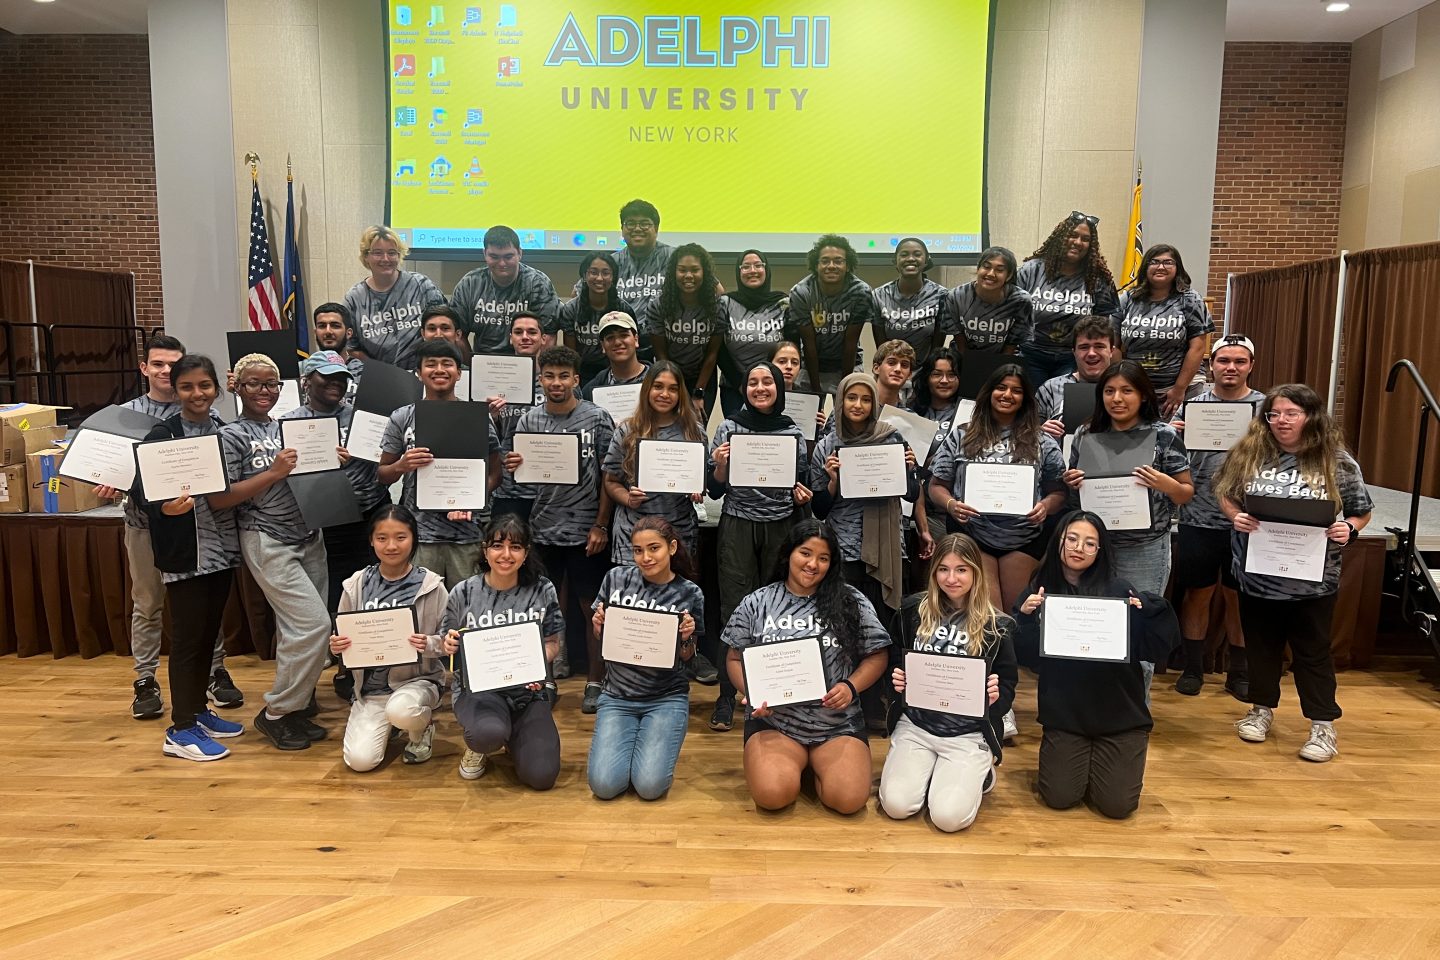 Large group of students wearing tie dye "Adelphi Gives Back" t-shirts hold up certificates. FCAP members on stage behind them.